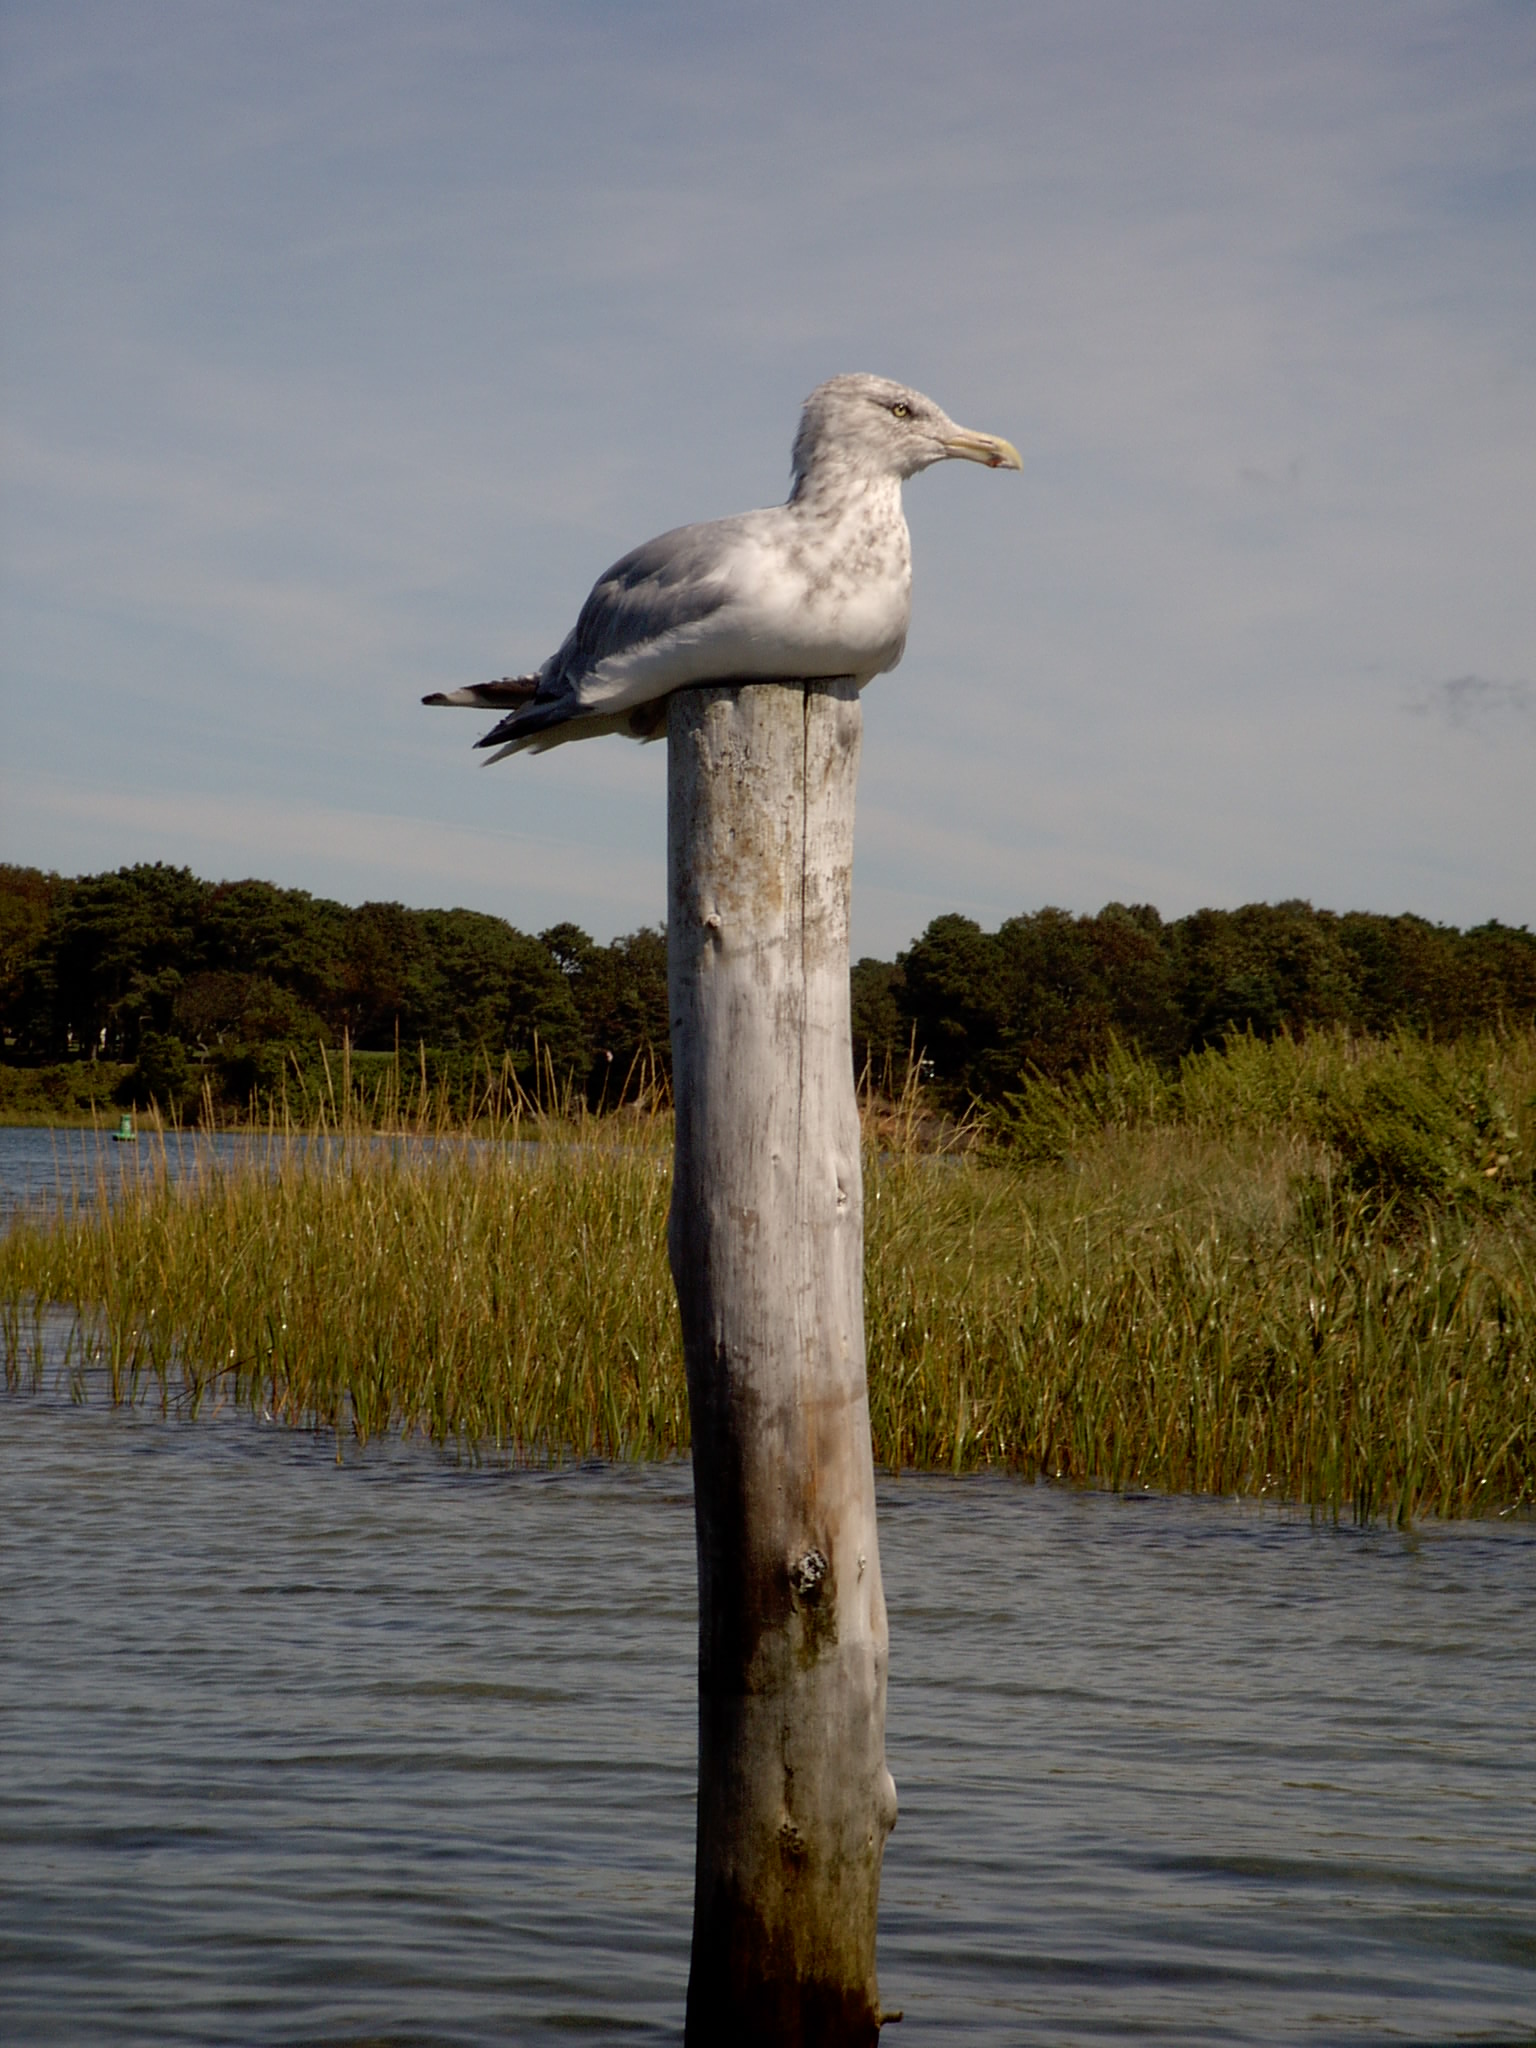 Bass River Seagull (user submitted)